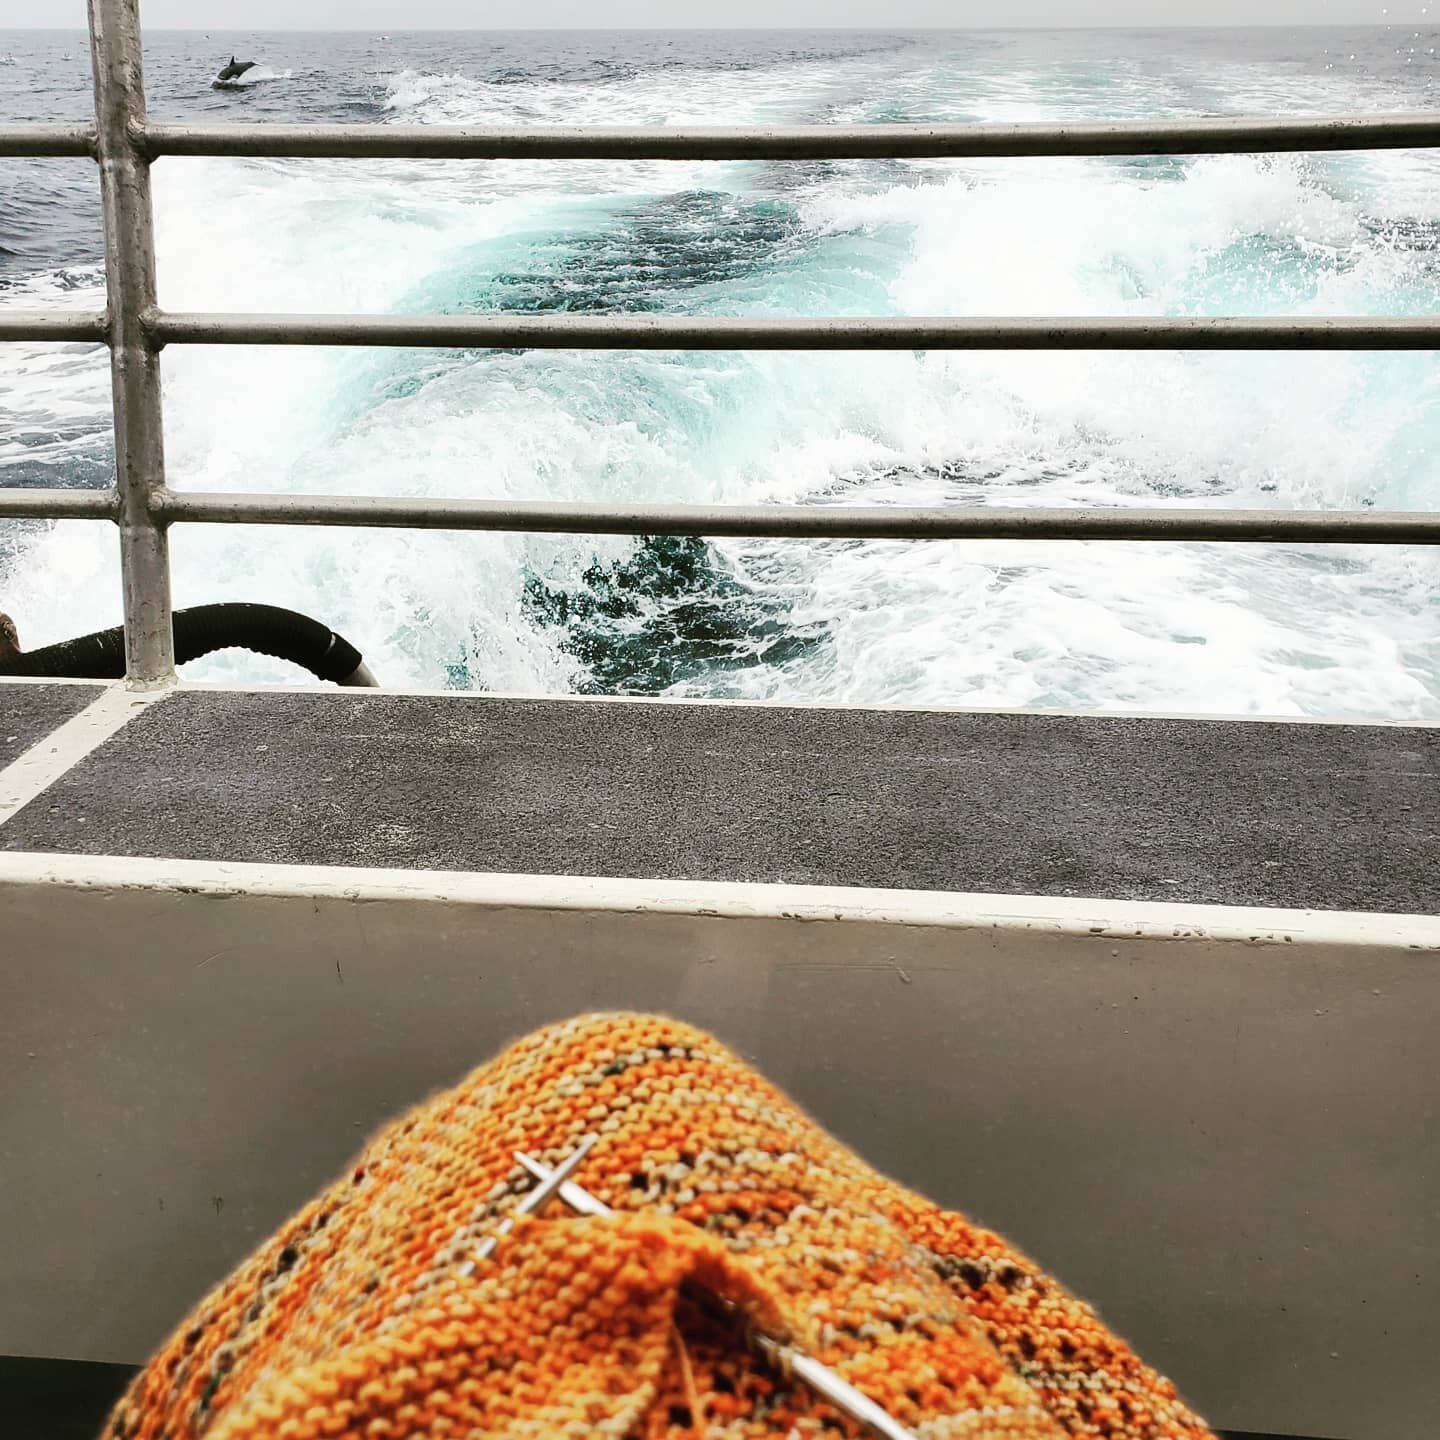 **New shop hours starting today -- Weds. 2-7, Fri. and Sat. 12-5** 
@1mesherri1 got to take a little trip for work yesterday, and was able to slip in a little knitting and dolphin watching! 🌞🧶🌊🐬 Back to working on her long overdue Shine wrap in o